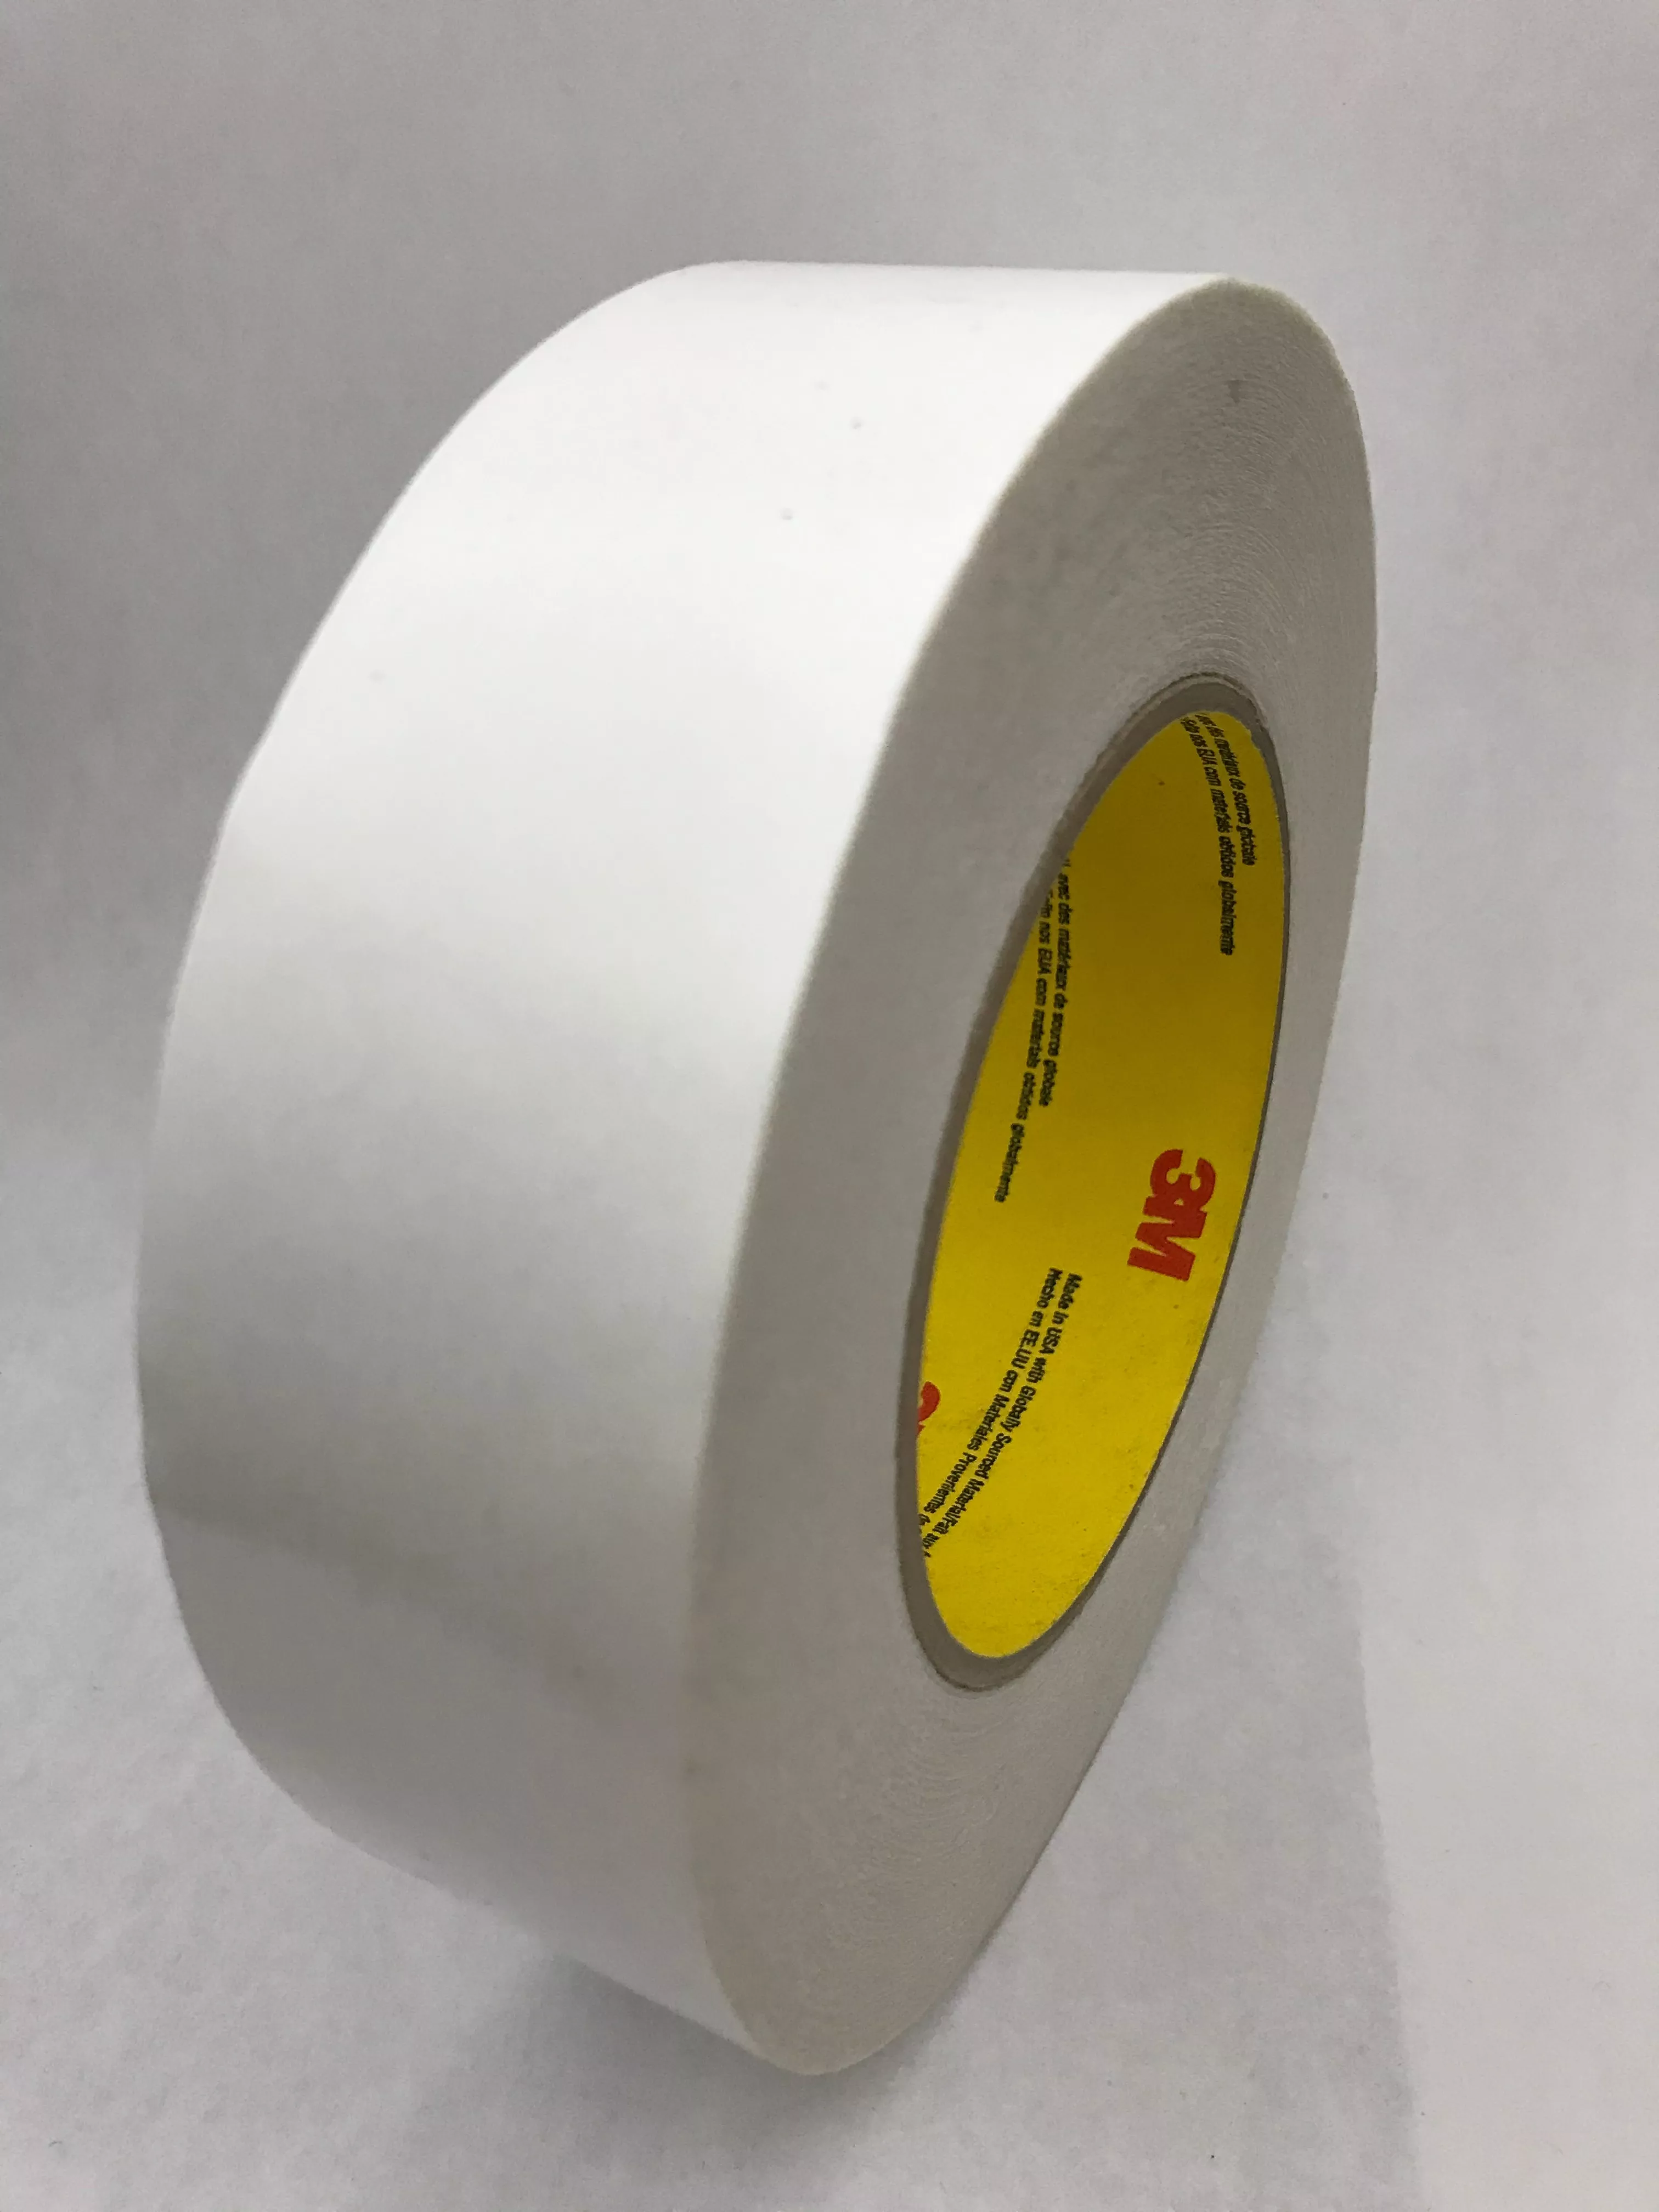 3M™ Venture Tape™ Double Coated Tape 514CW, 2 1/2 in x 55 yd, 0.5 mil,
20 Roll/Case